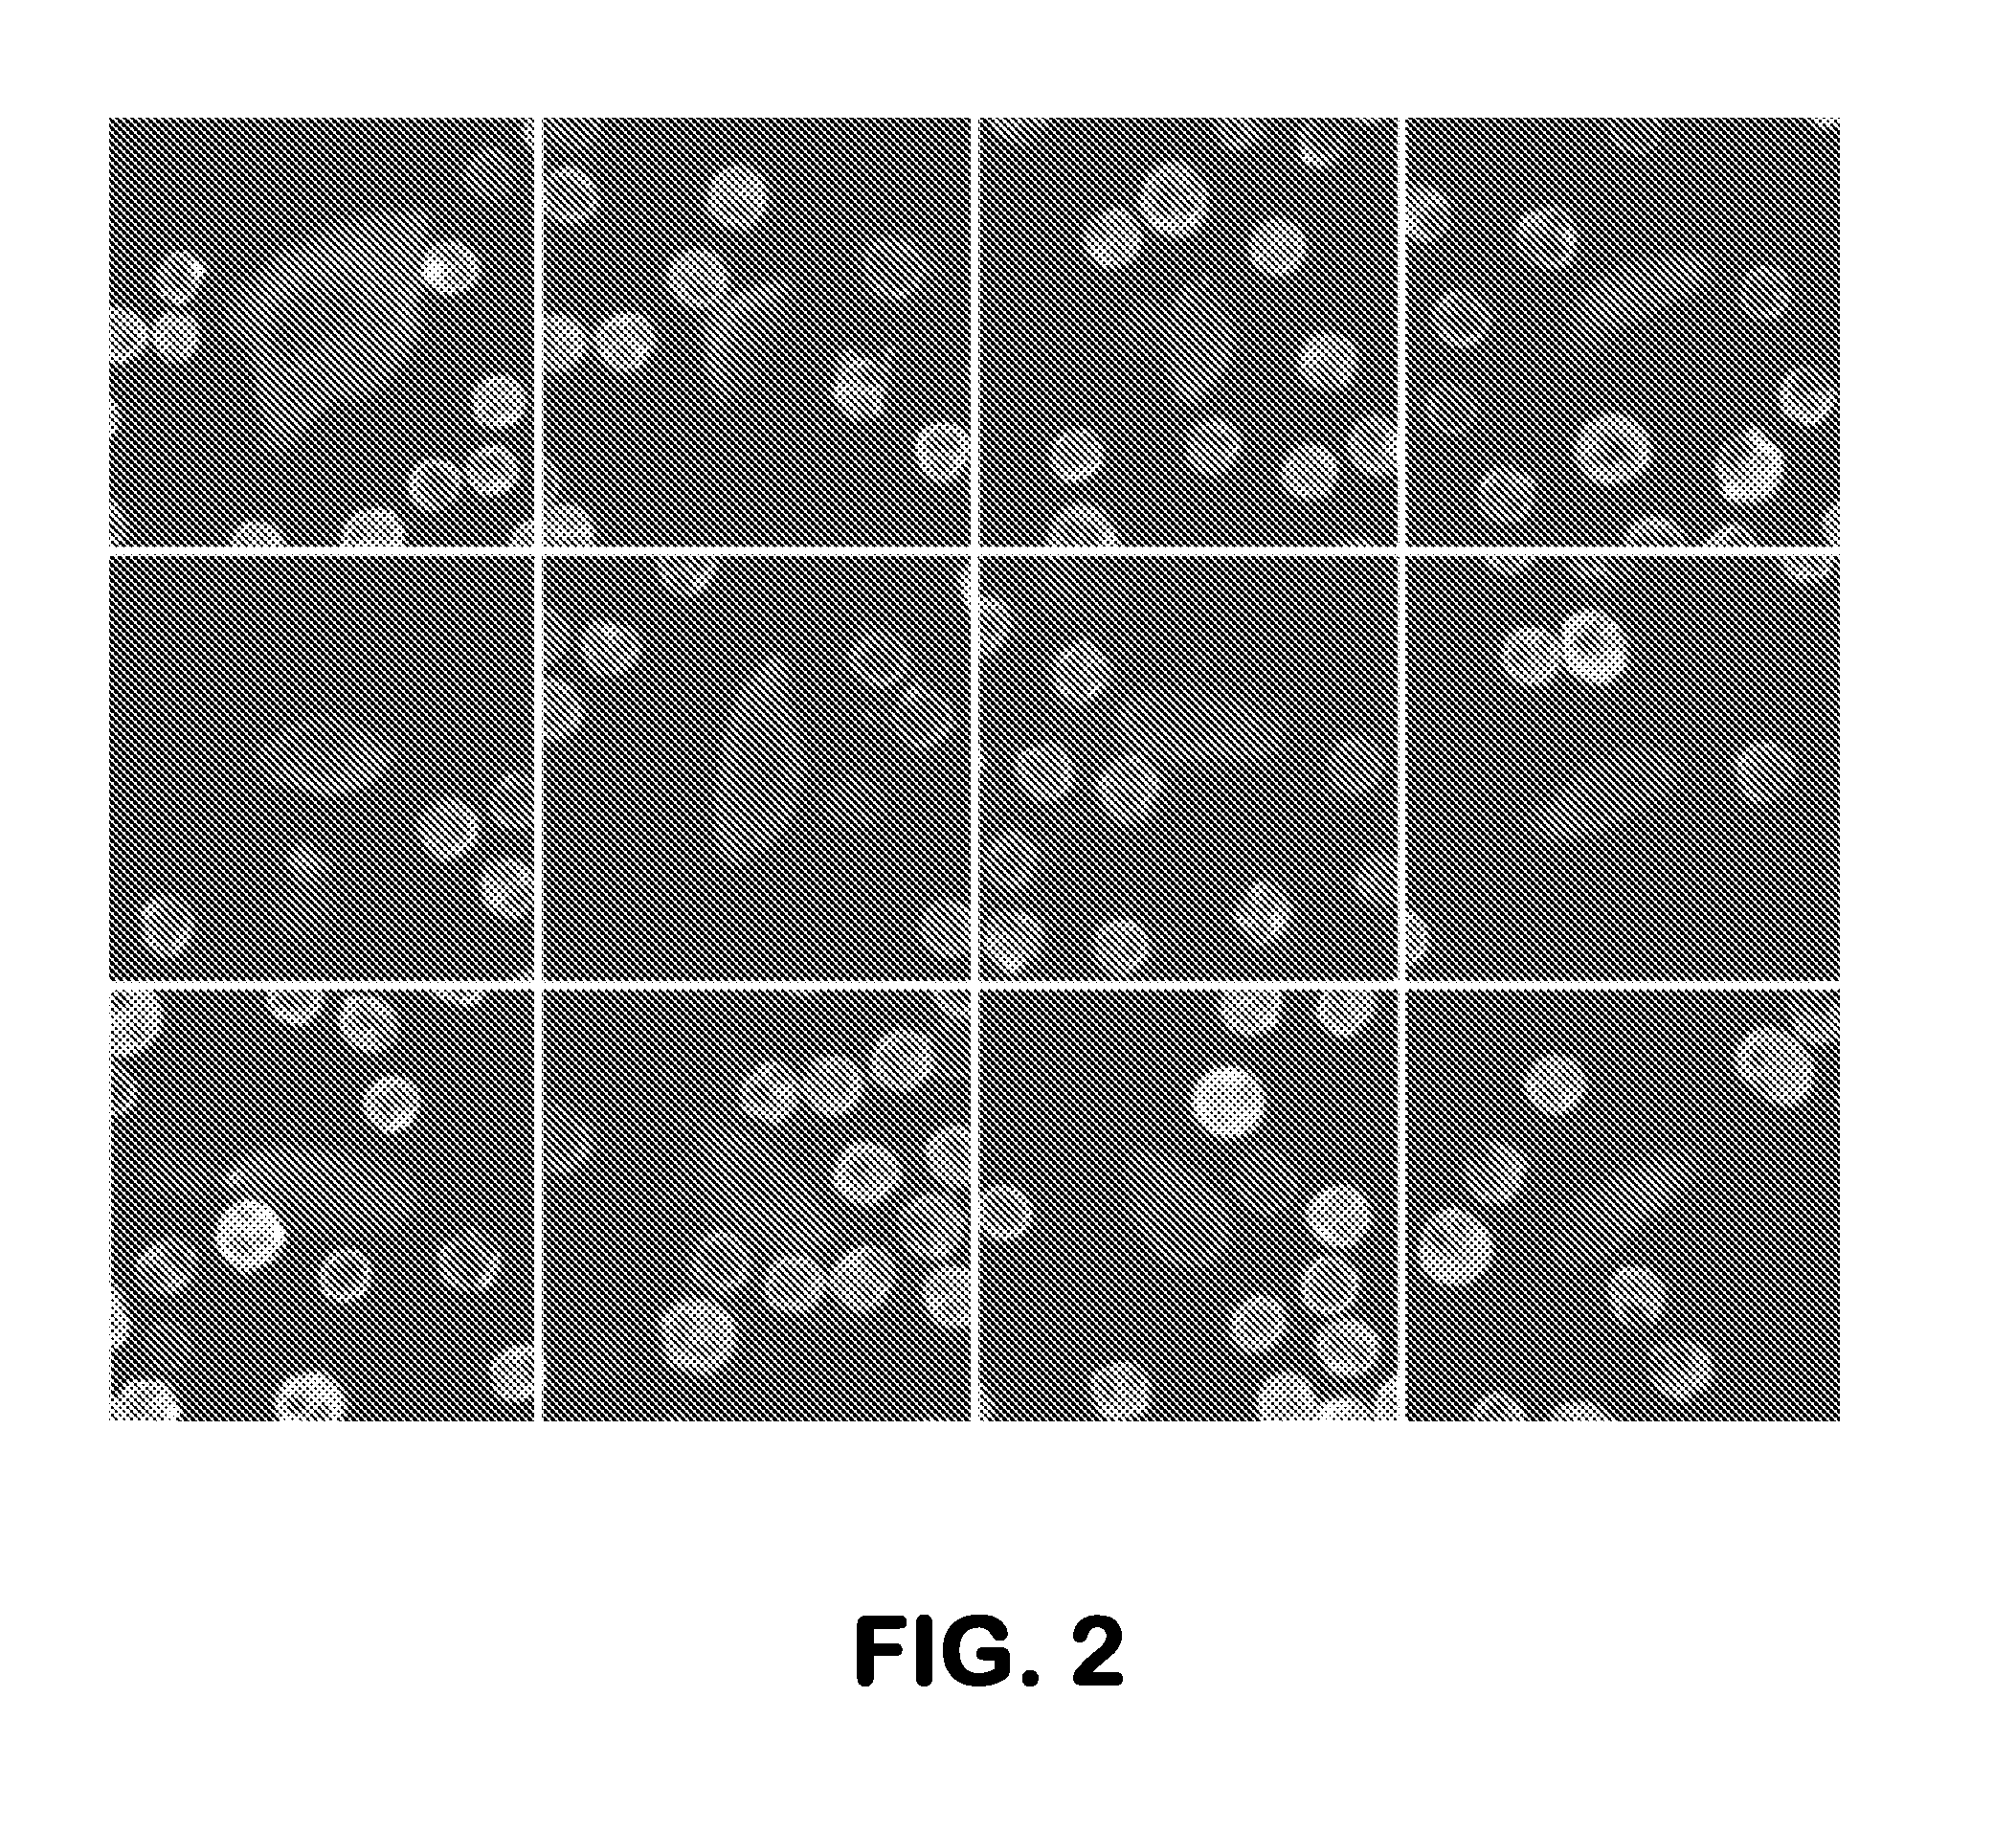 Method of Using Non-Rare Cells to Detect Rare Cells